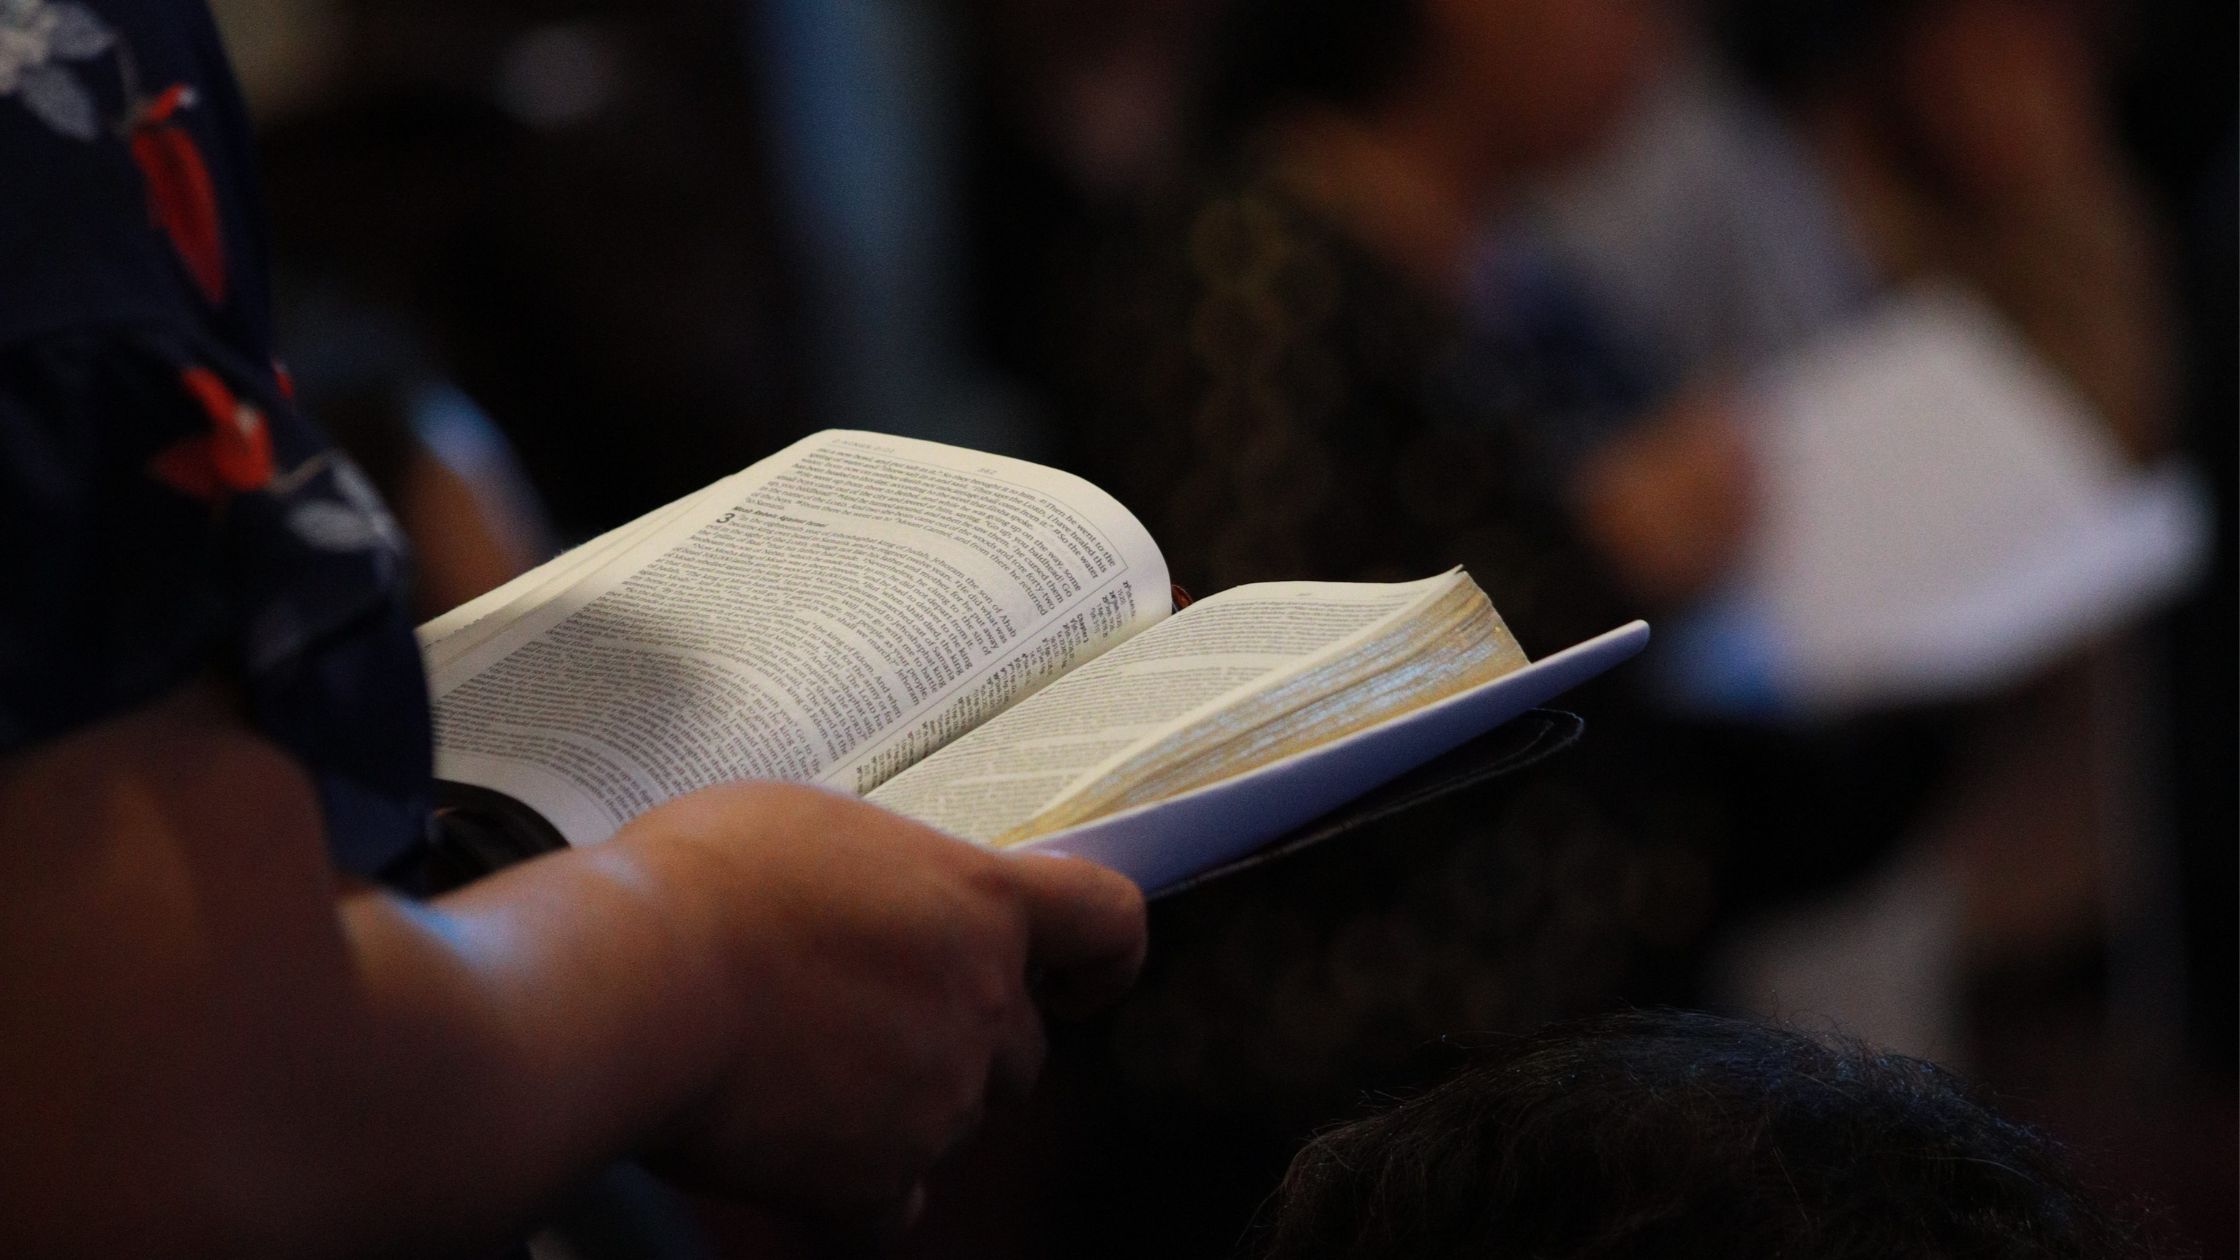 Teaching v. Preaching: What Should We Get at the Gathering?